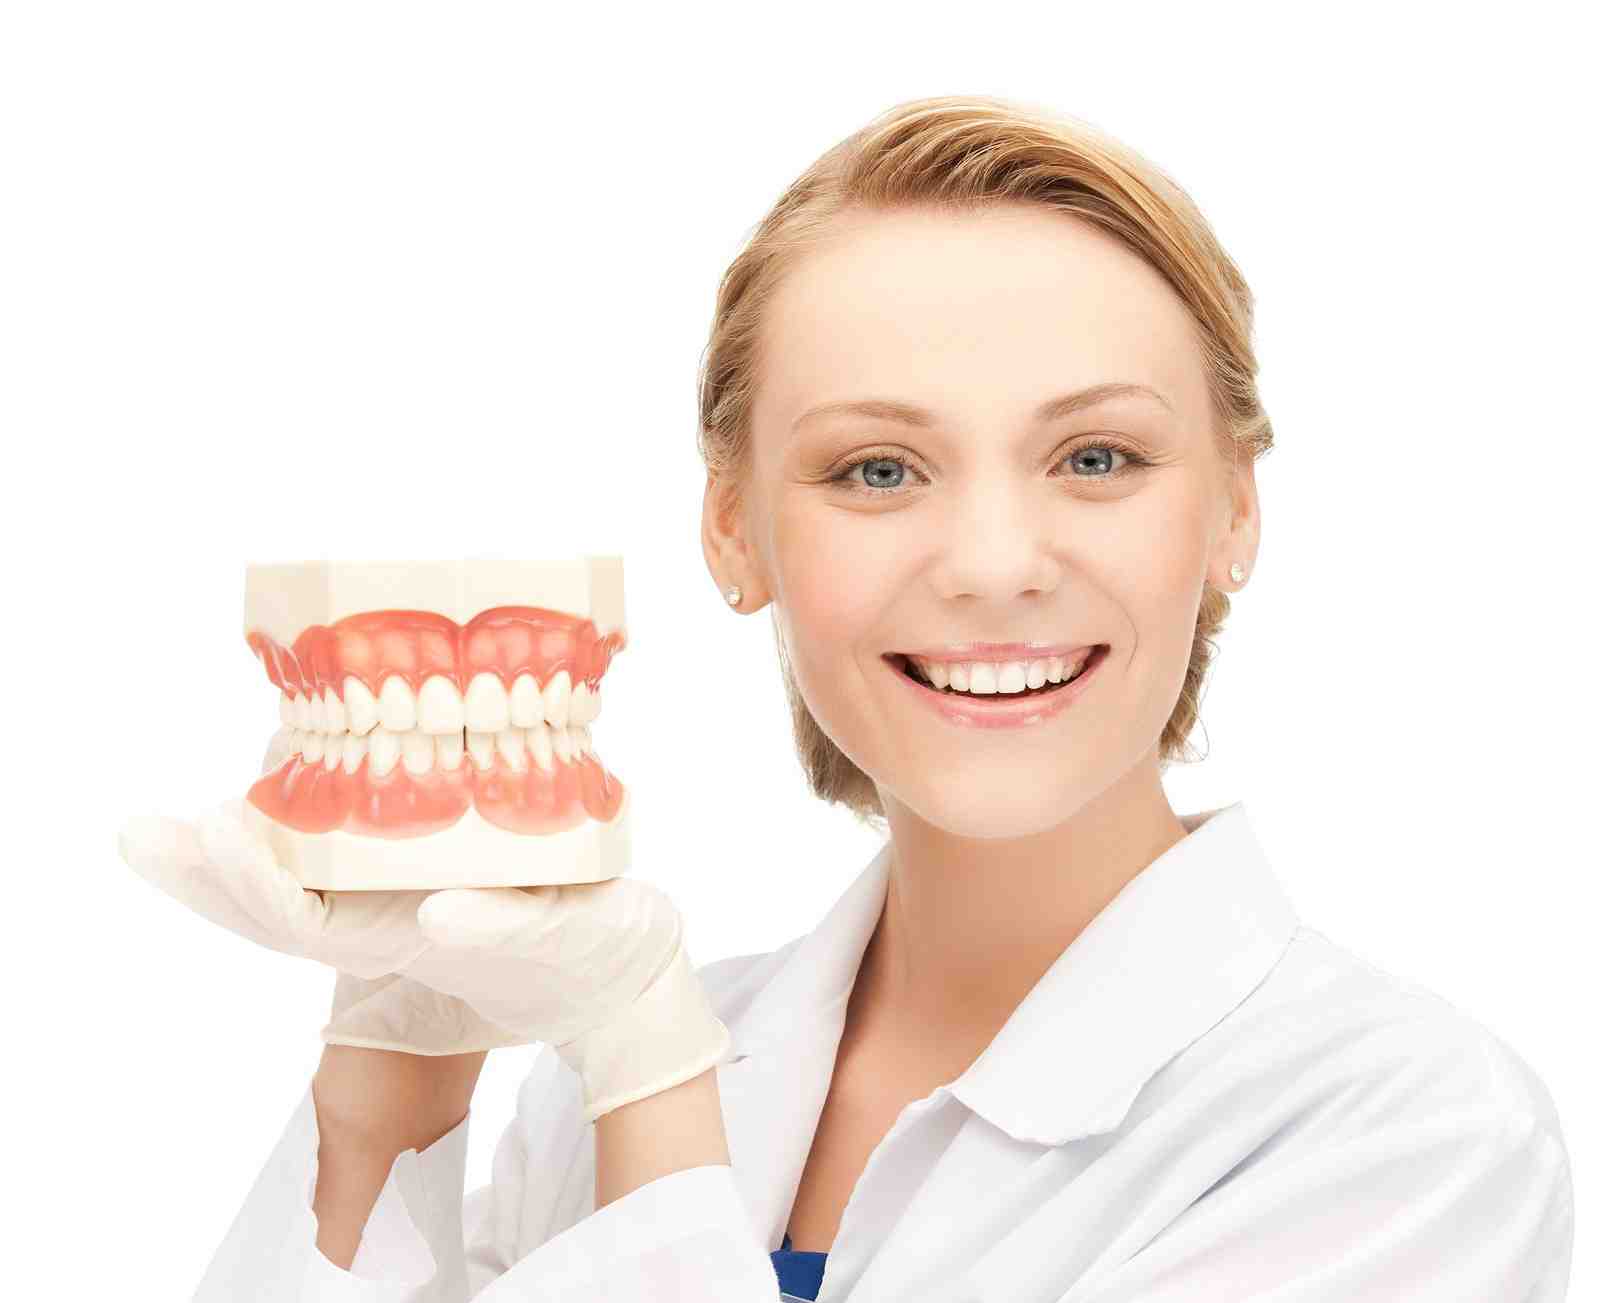 How much does it cost to get a wisdom tooth pulled without insurance?